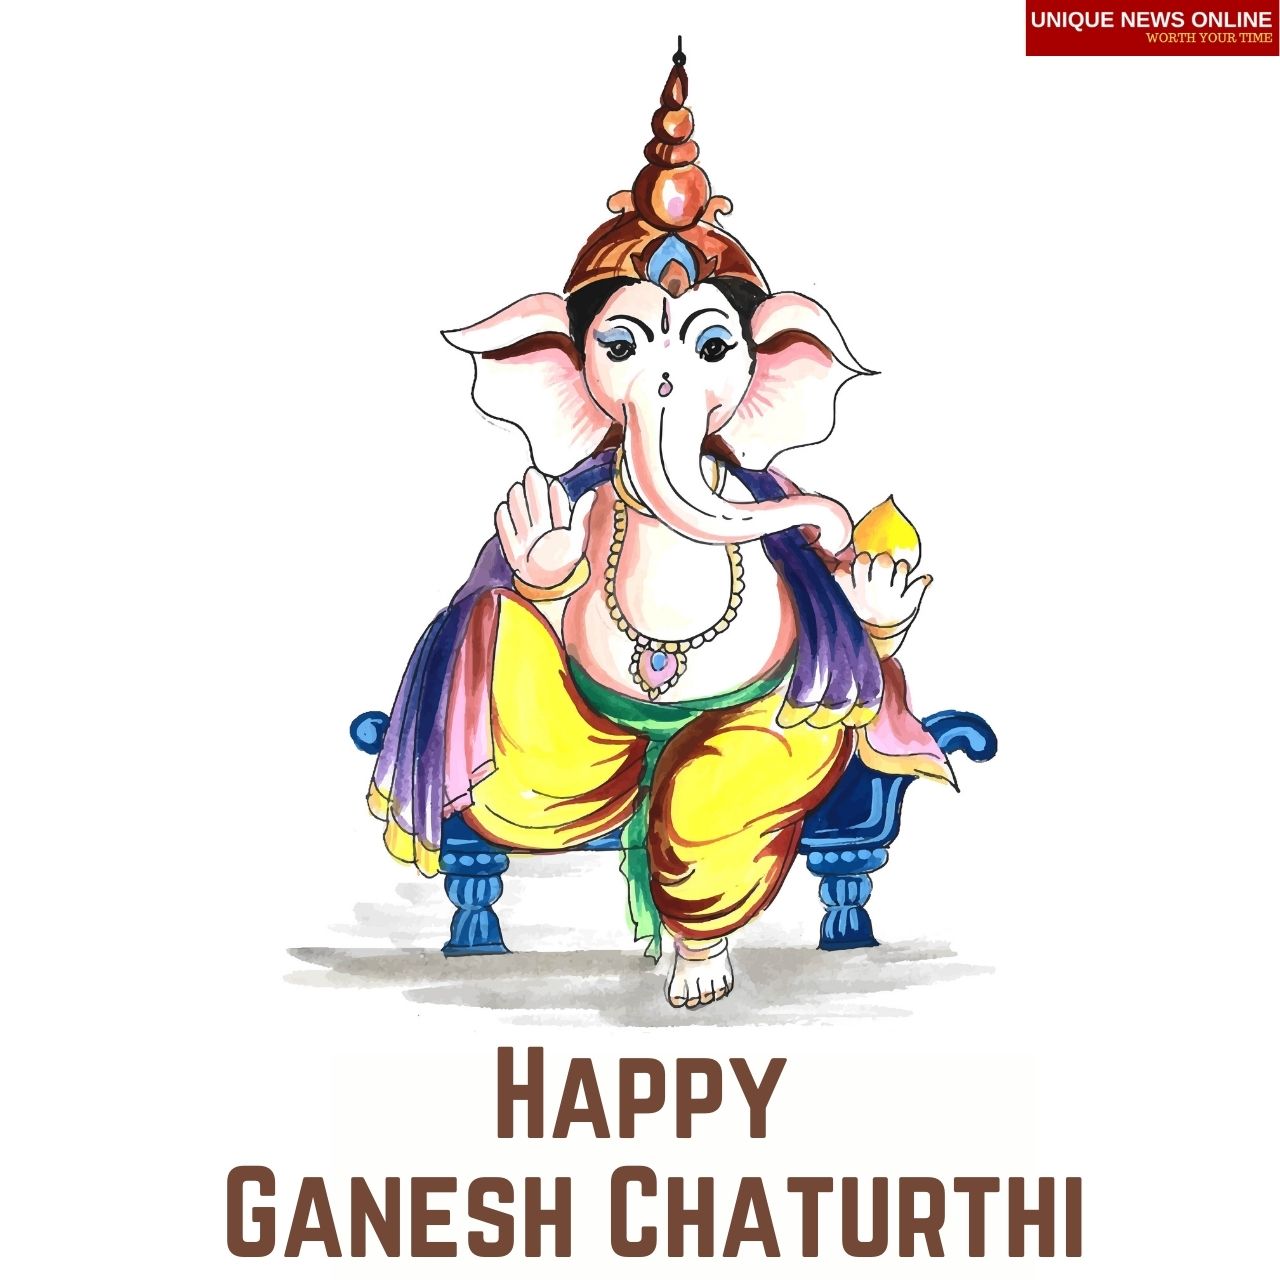 Ganesh Chaturthi 2021 Wishes Quotes Hd Images And Sms For Friends And Relatives 0010